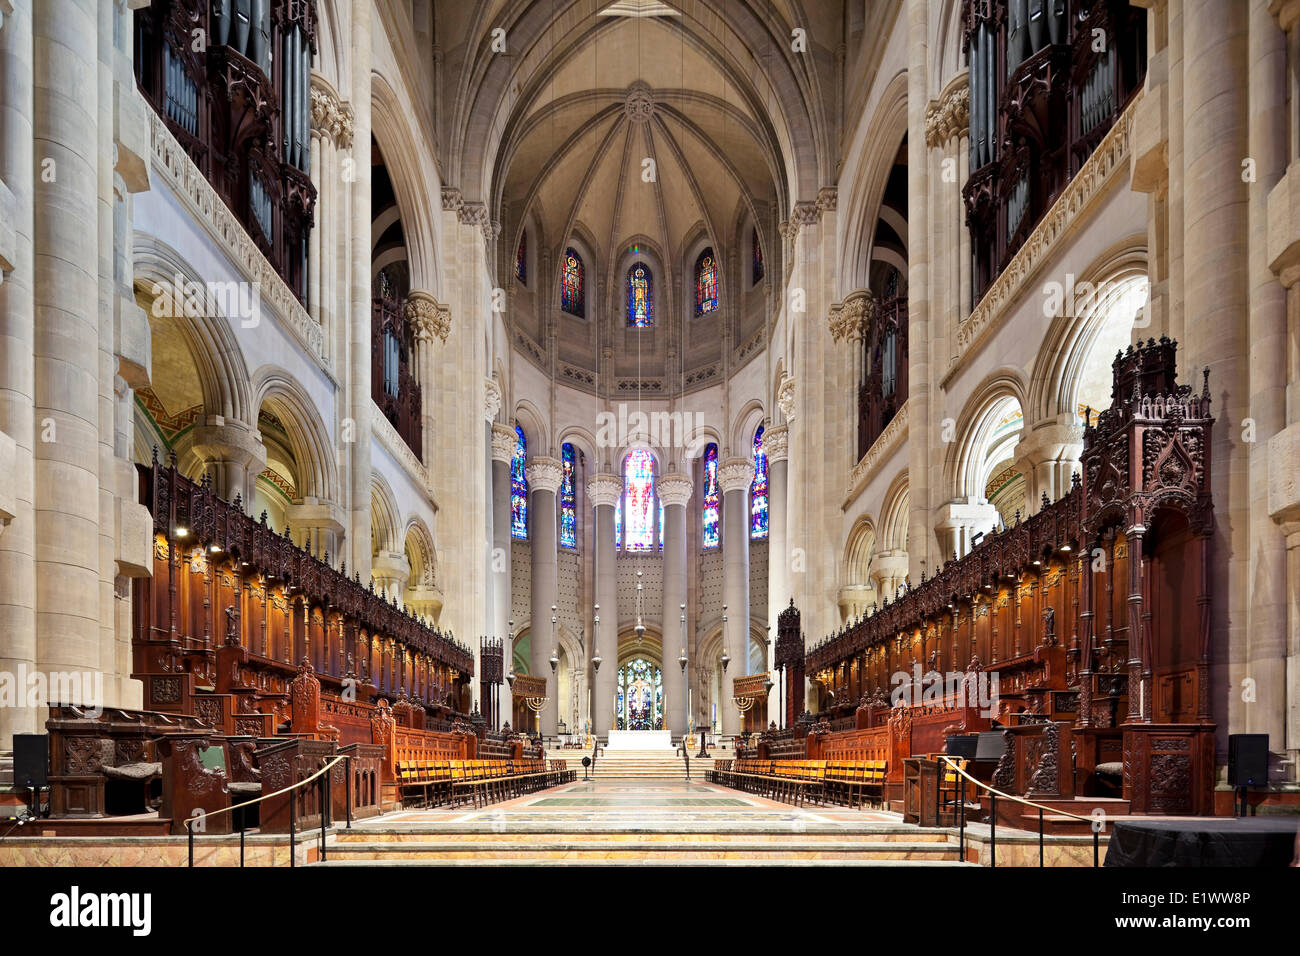 Completed in 1911 26 years after construction the Cathedral began in 1892 the Choir High Altar's architectural style is Stock Photo